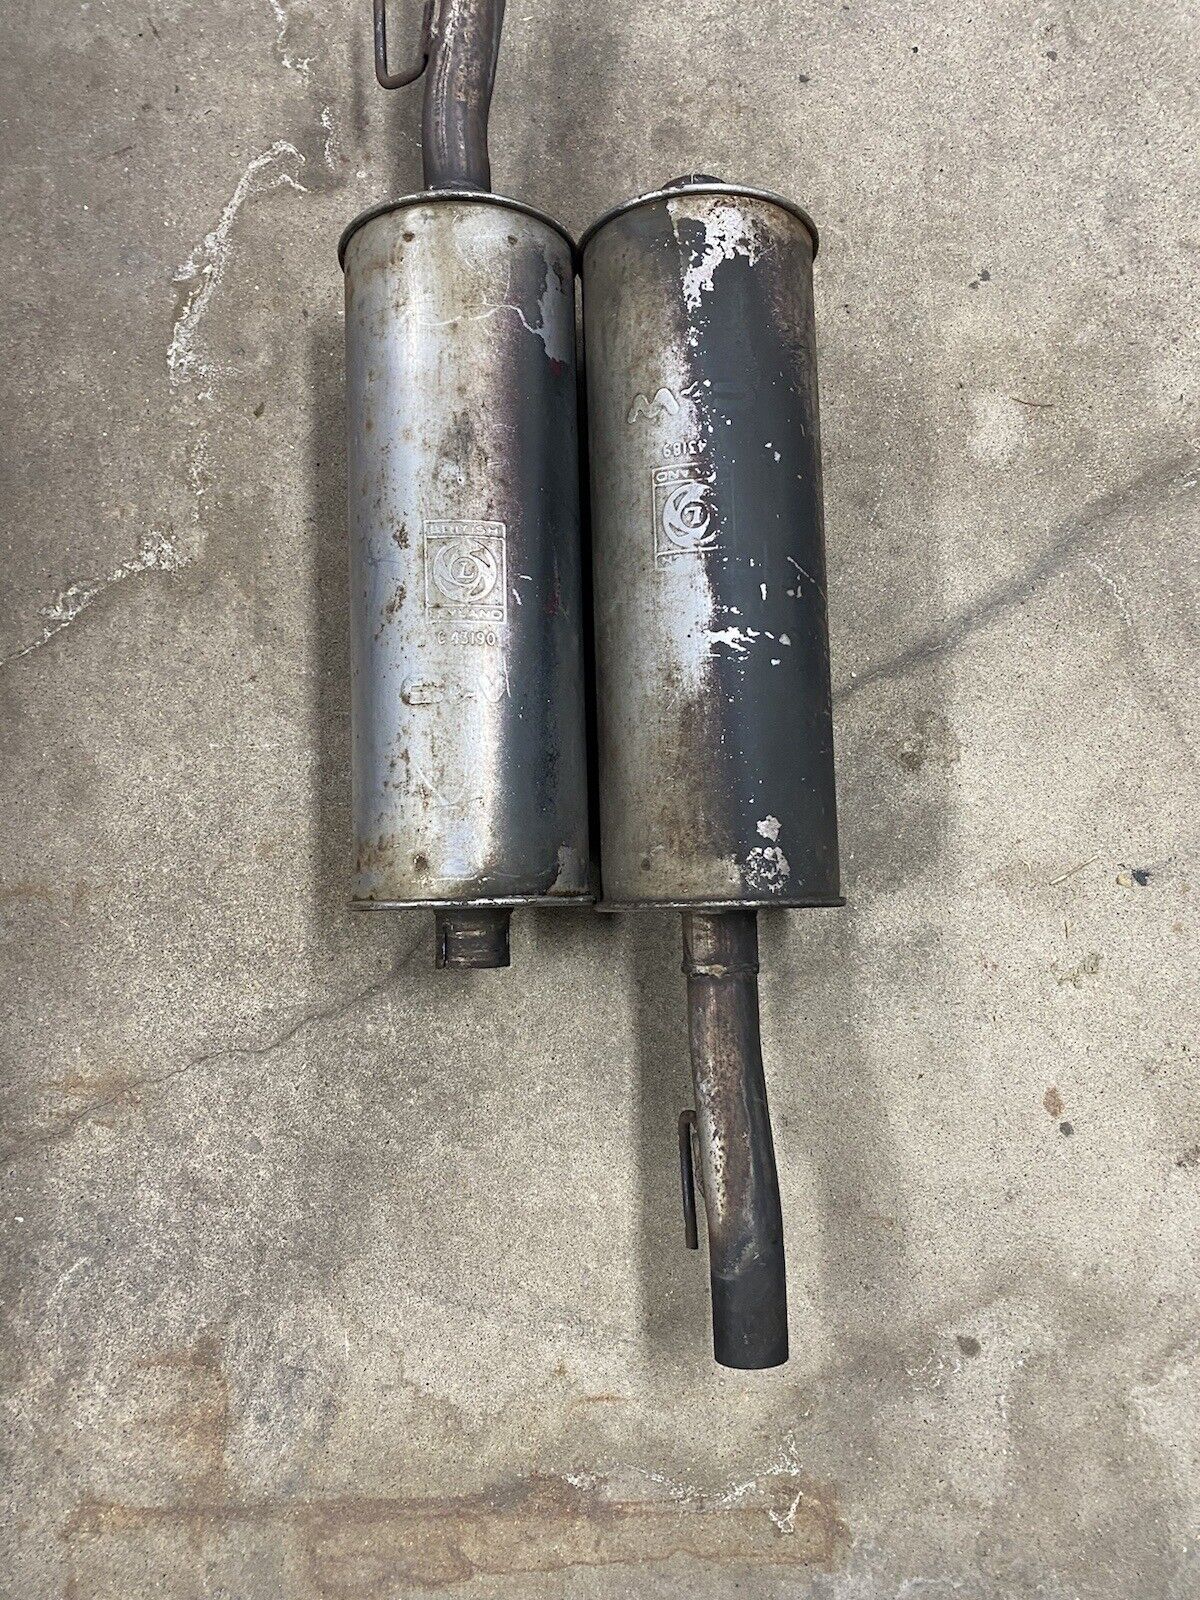 Jaguar XJ6 Series 2 Rear Left And Right Exhaust OEM C43190 And C43189.